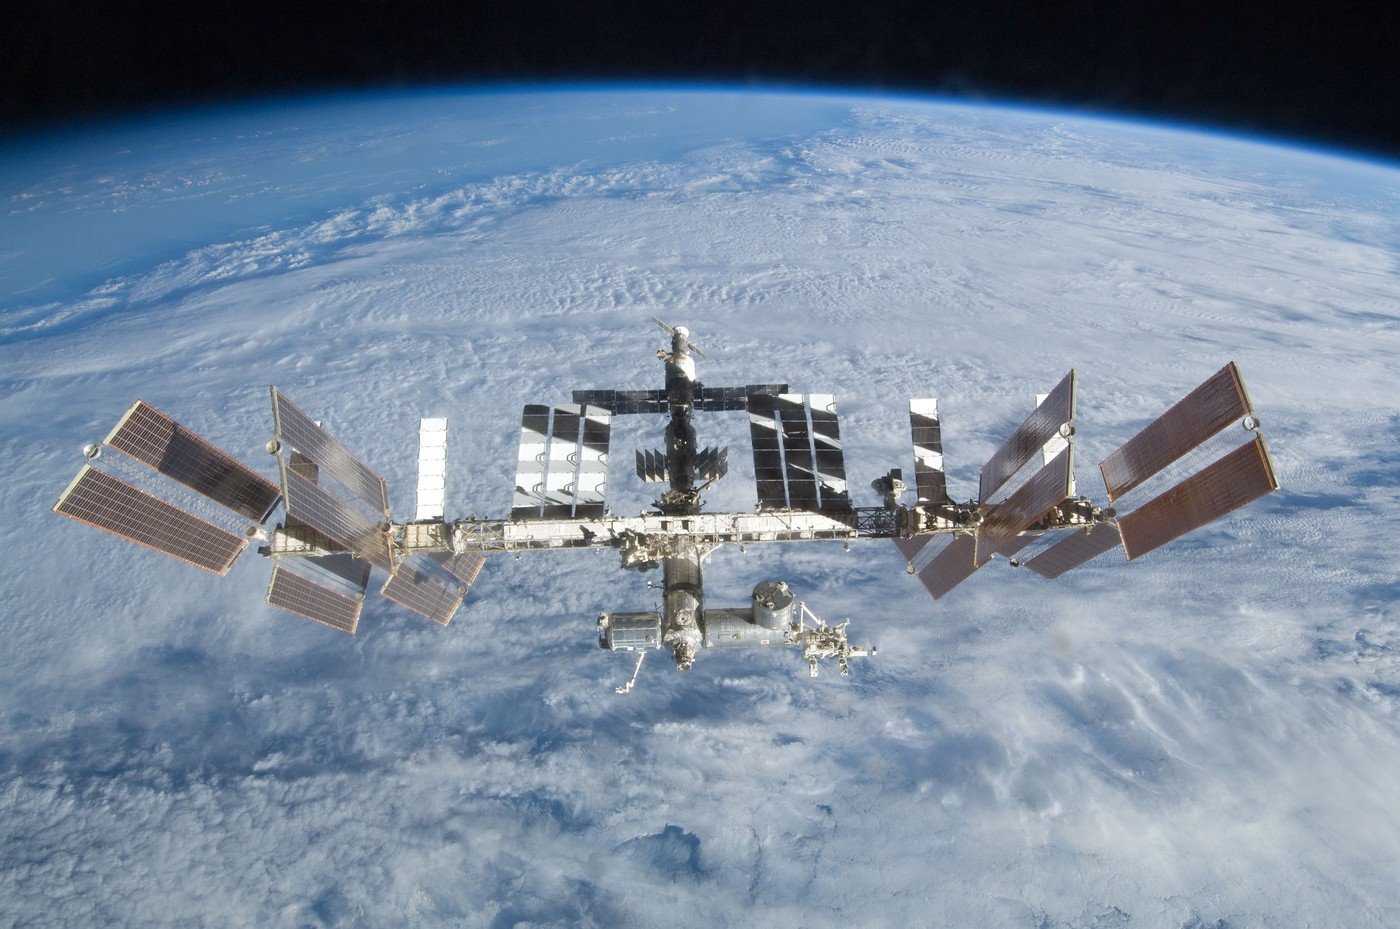 NASA issued a statement: The International Space Station will collide and crash into this sea in 2031